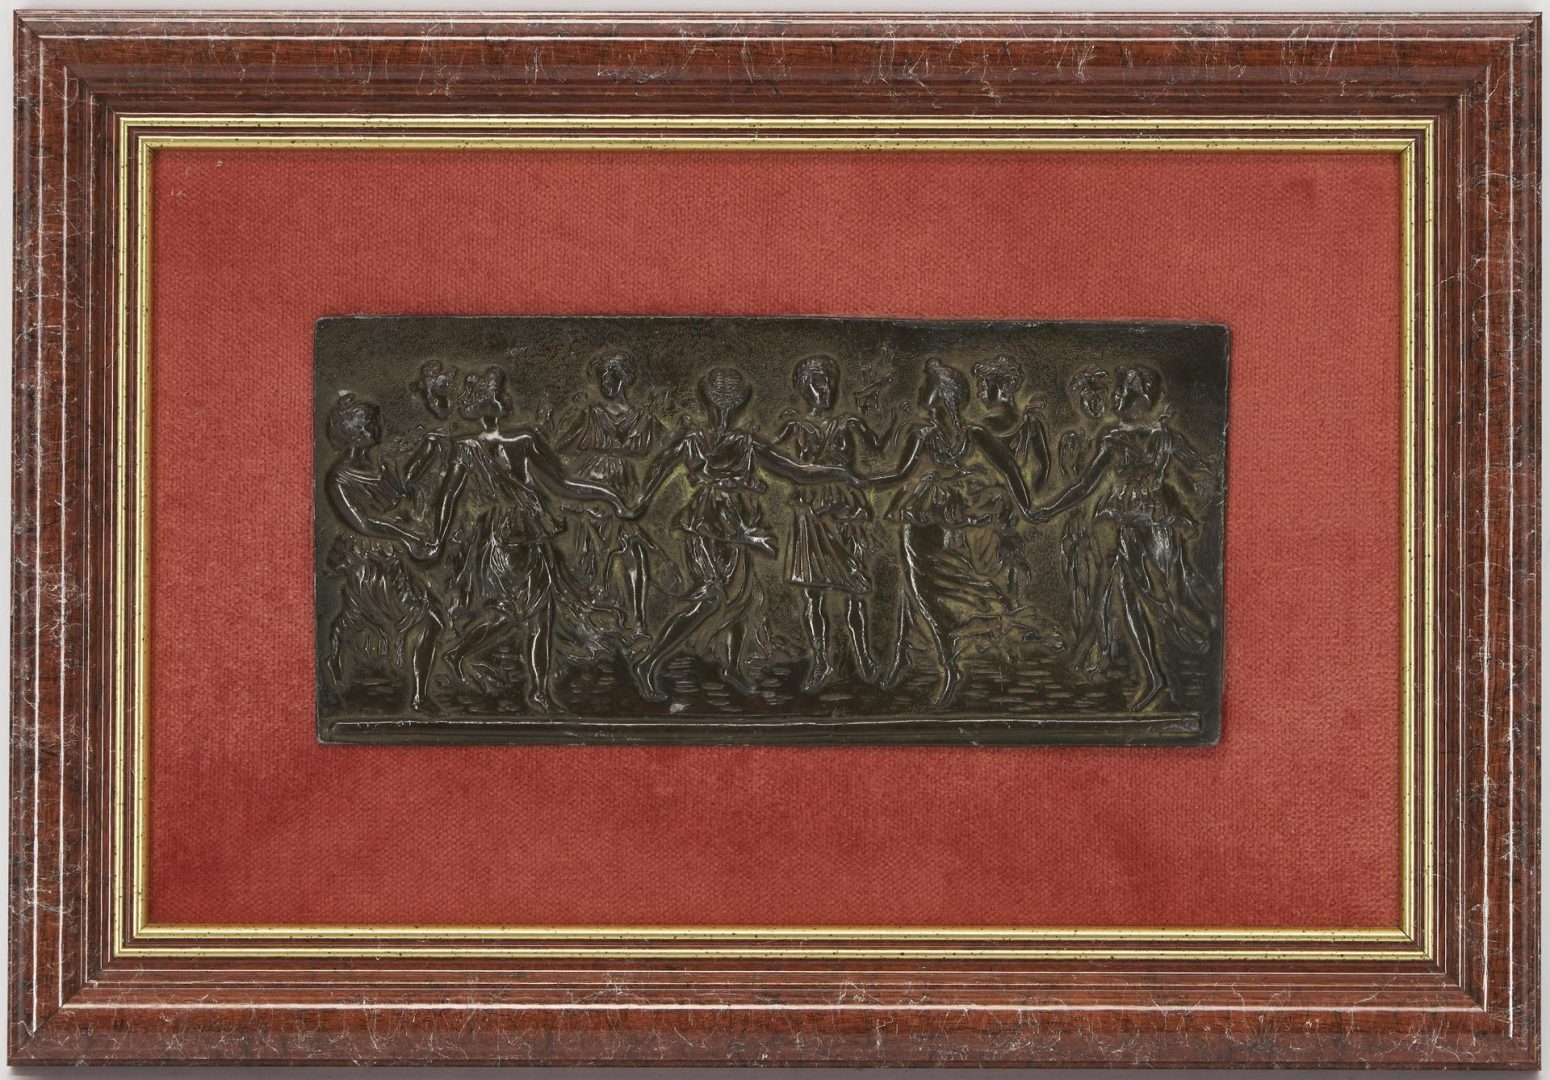 Lot 1188: 6 Items inc French Bas Relief, Mounted/Framed Bronze Portrait Plaques & 4 Delft Tiles